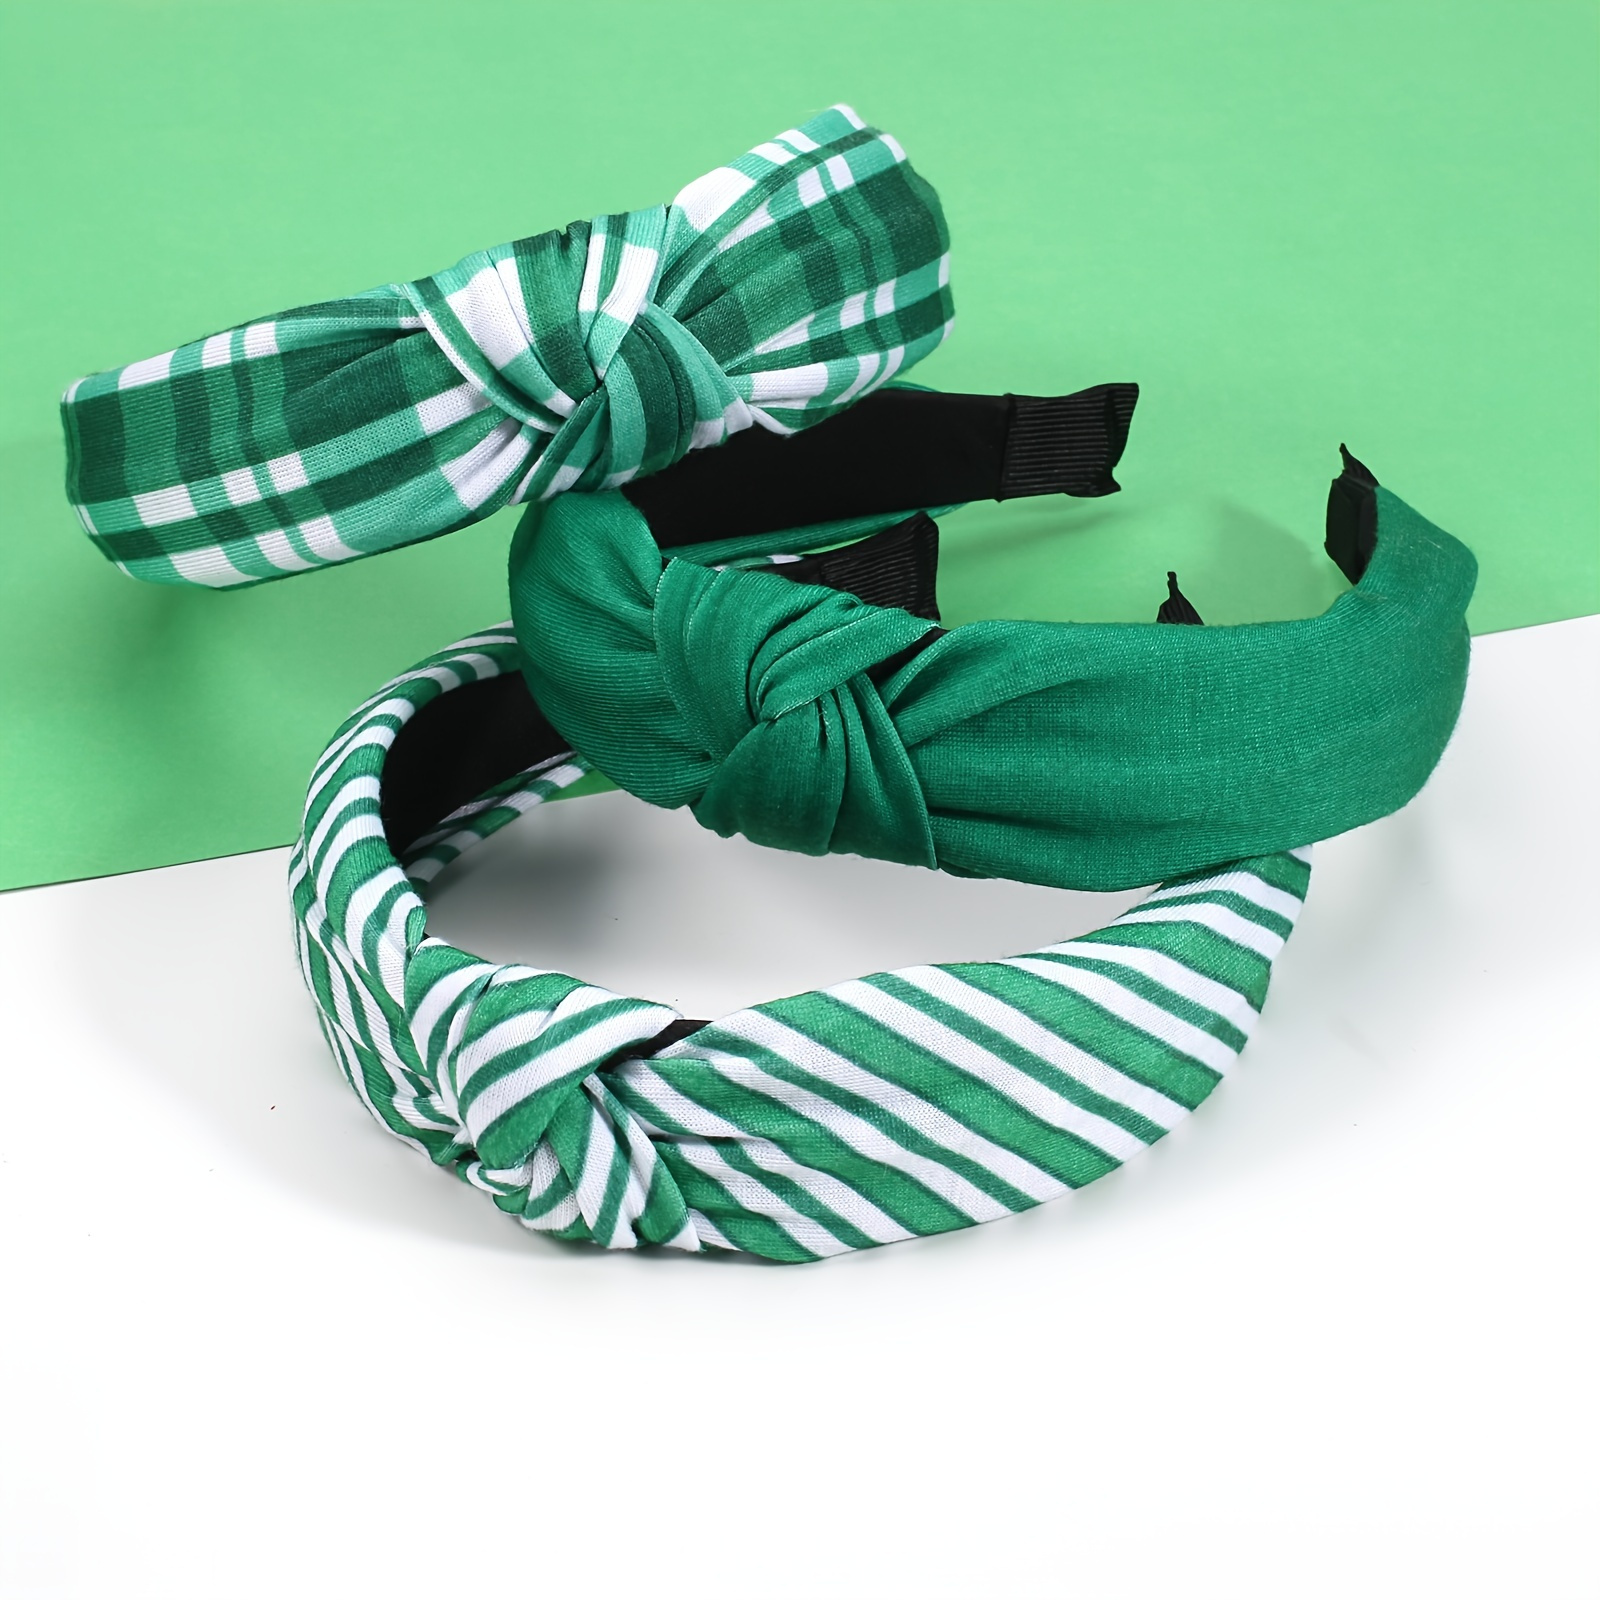 

1pc St. Patrick's Day Green Striped Headband Cross Top Knot Hair Bands Hairband Hair Accessories Twisted Knotted Head Wrap